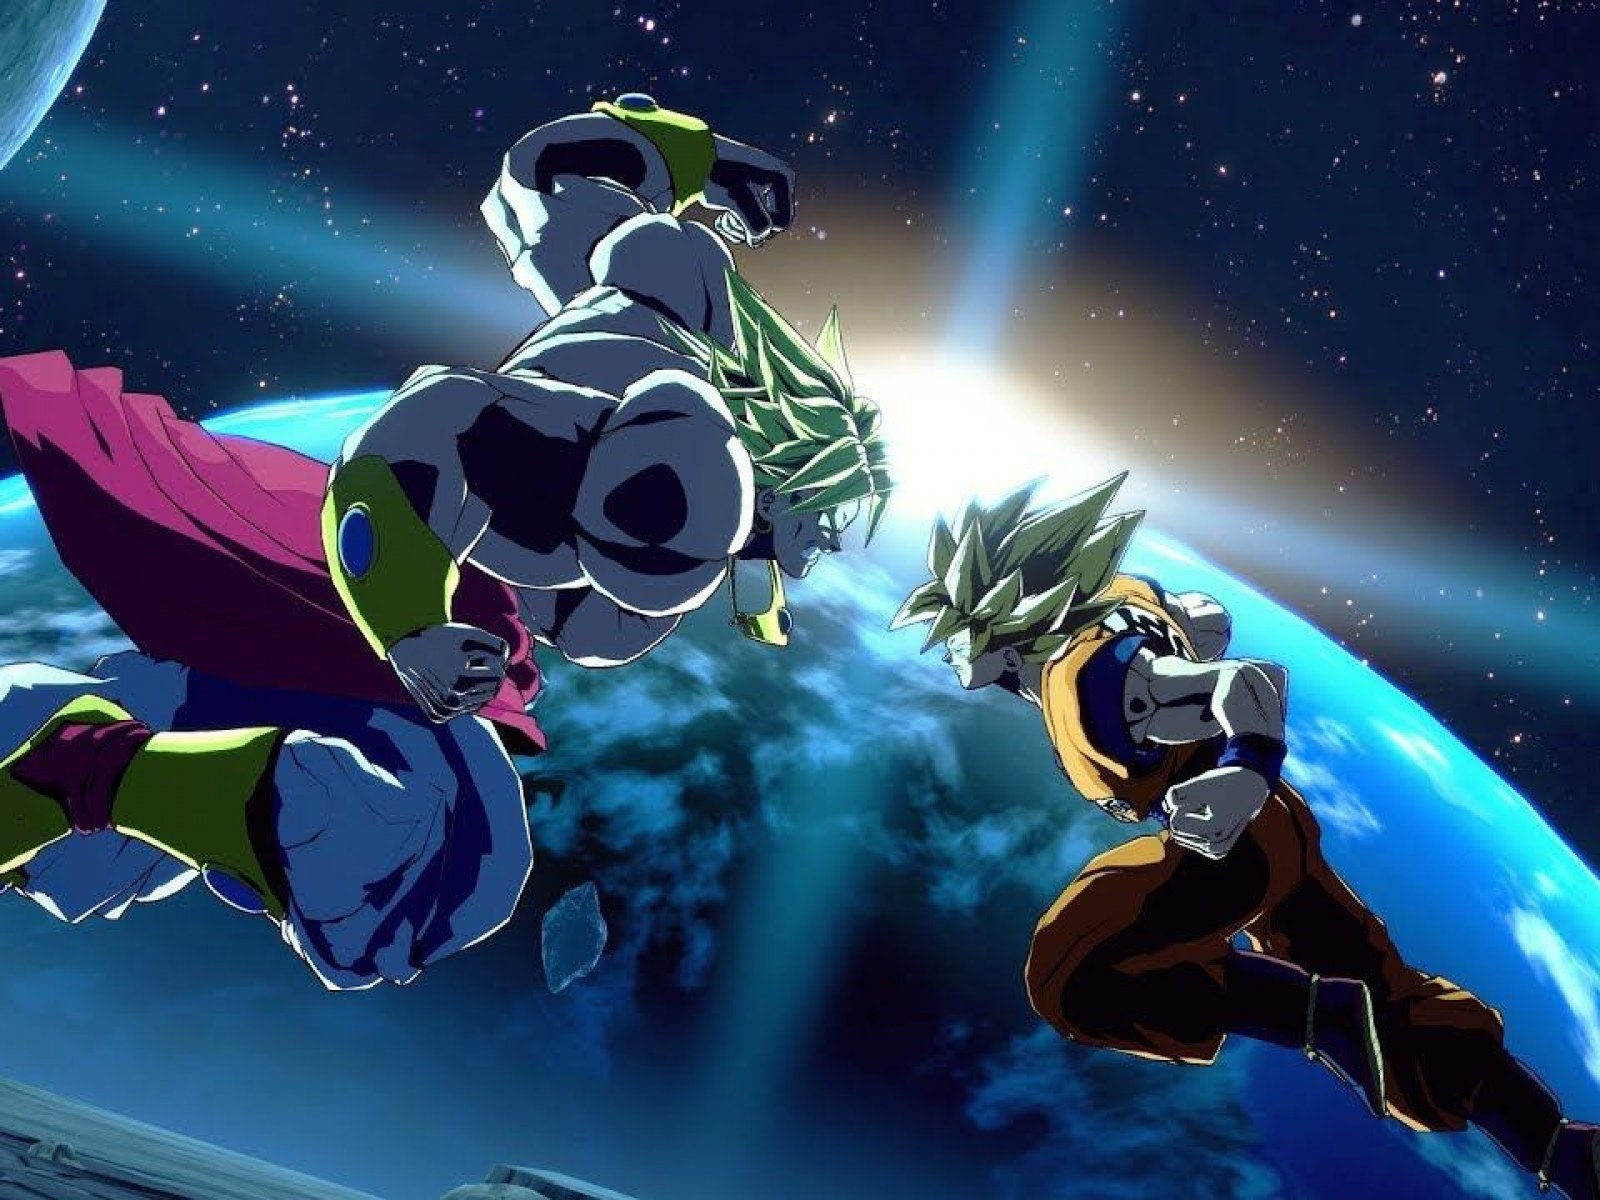 The character of Broly redeemed thanks to Dragon Ball Super — Steemit